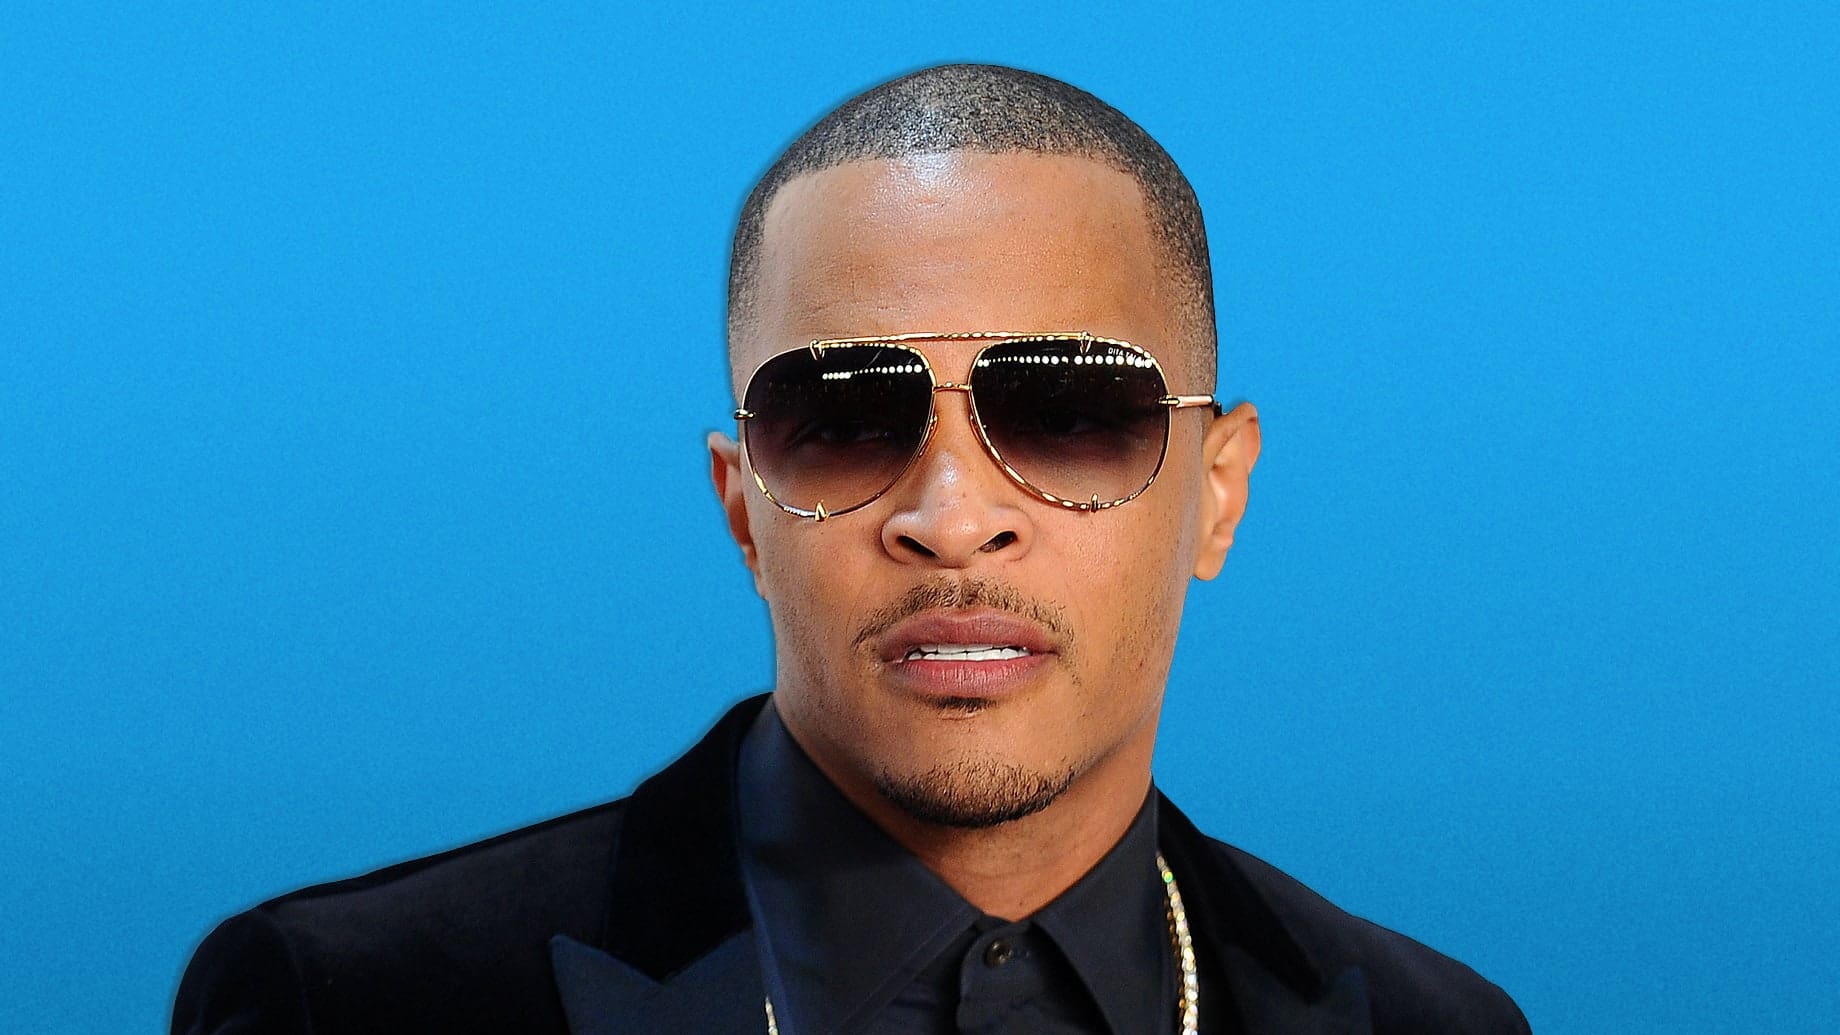 T.I. Shares An Important Video About The Debate Between President Donald Trump And Joe Biden